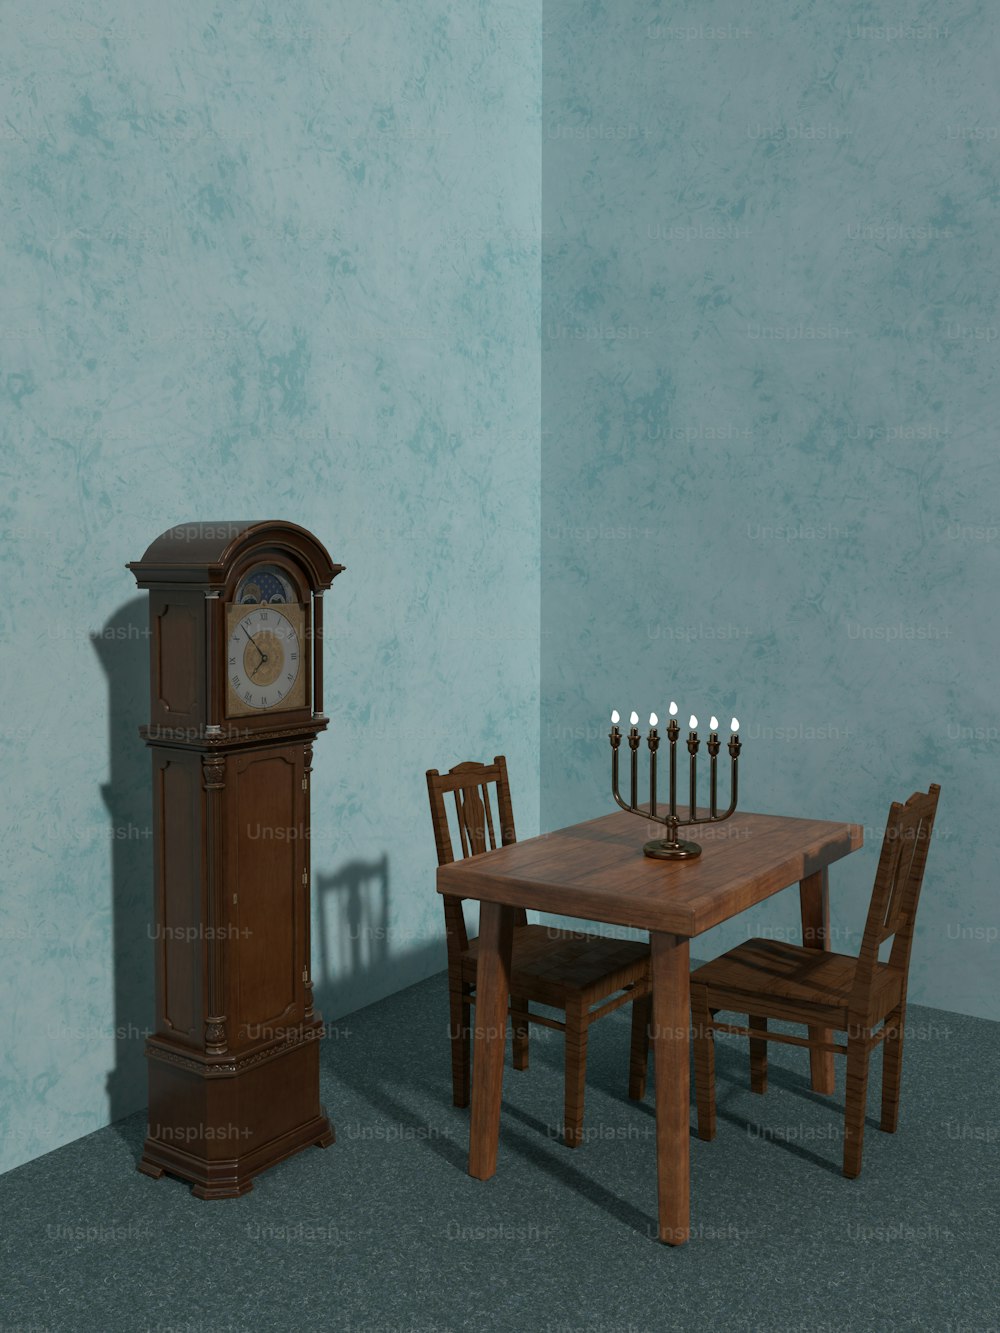 a wooden table with chairs and a grandfather clock